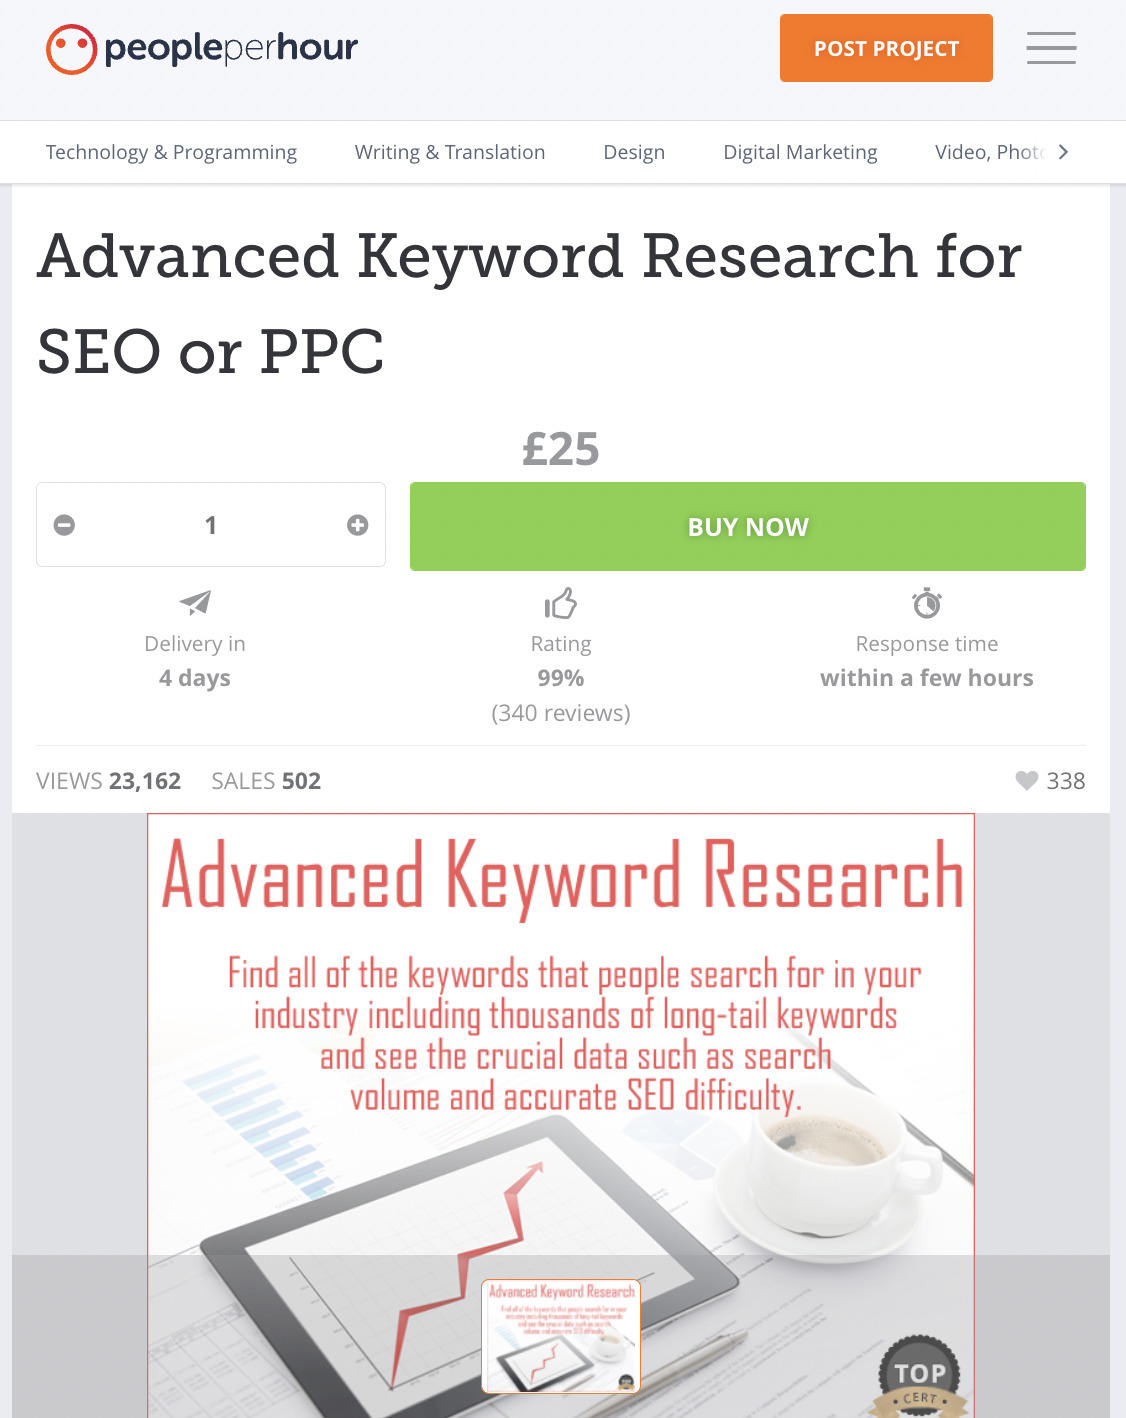 Keyword research productized service, via People Per Hour
